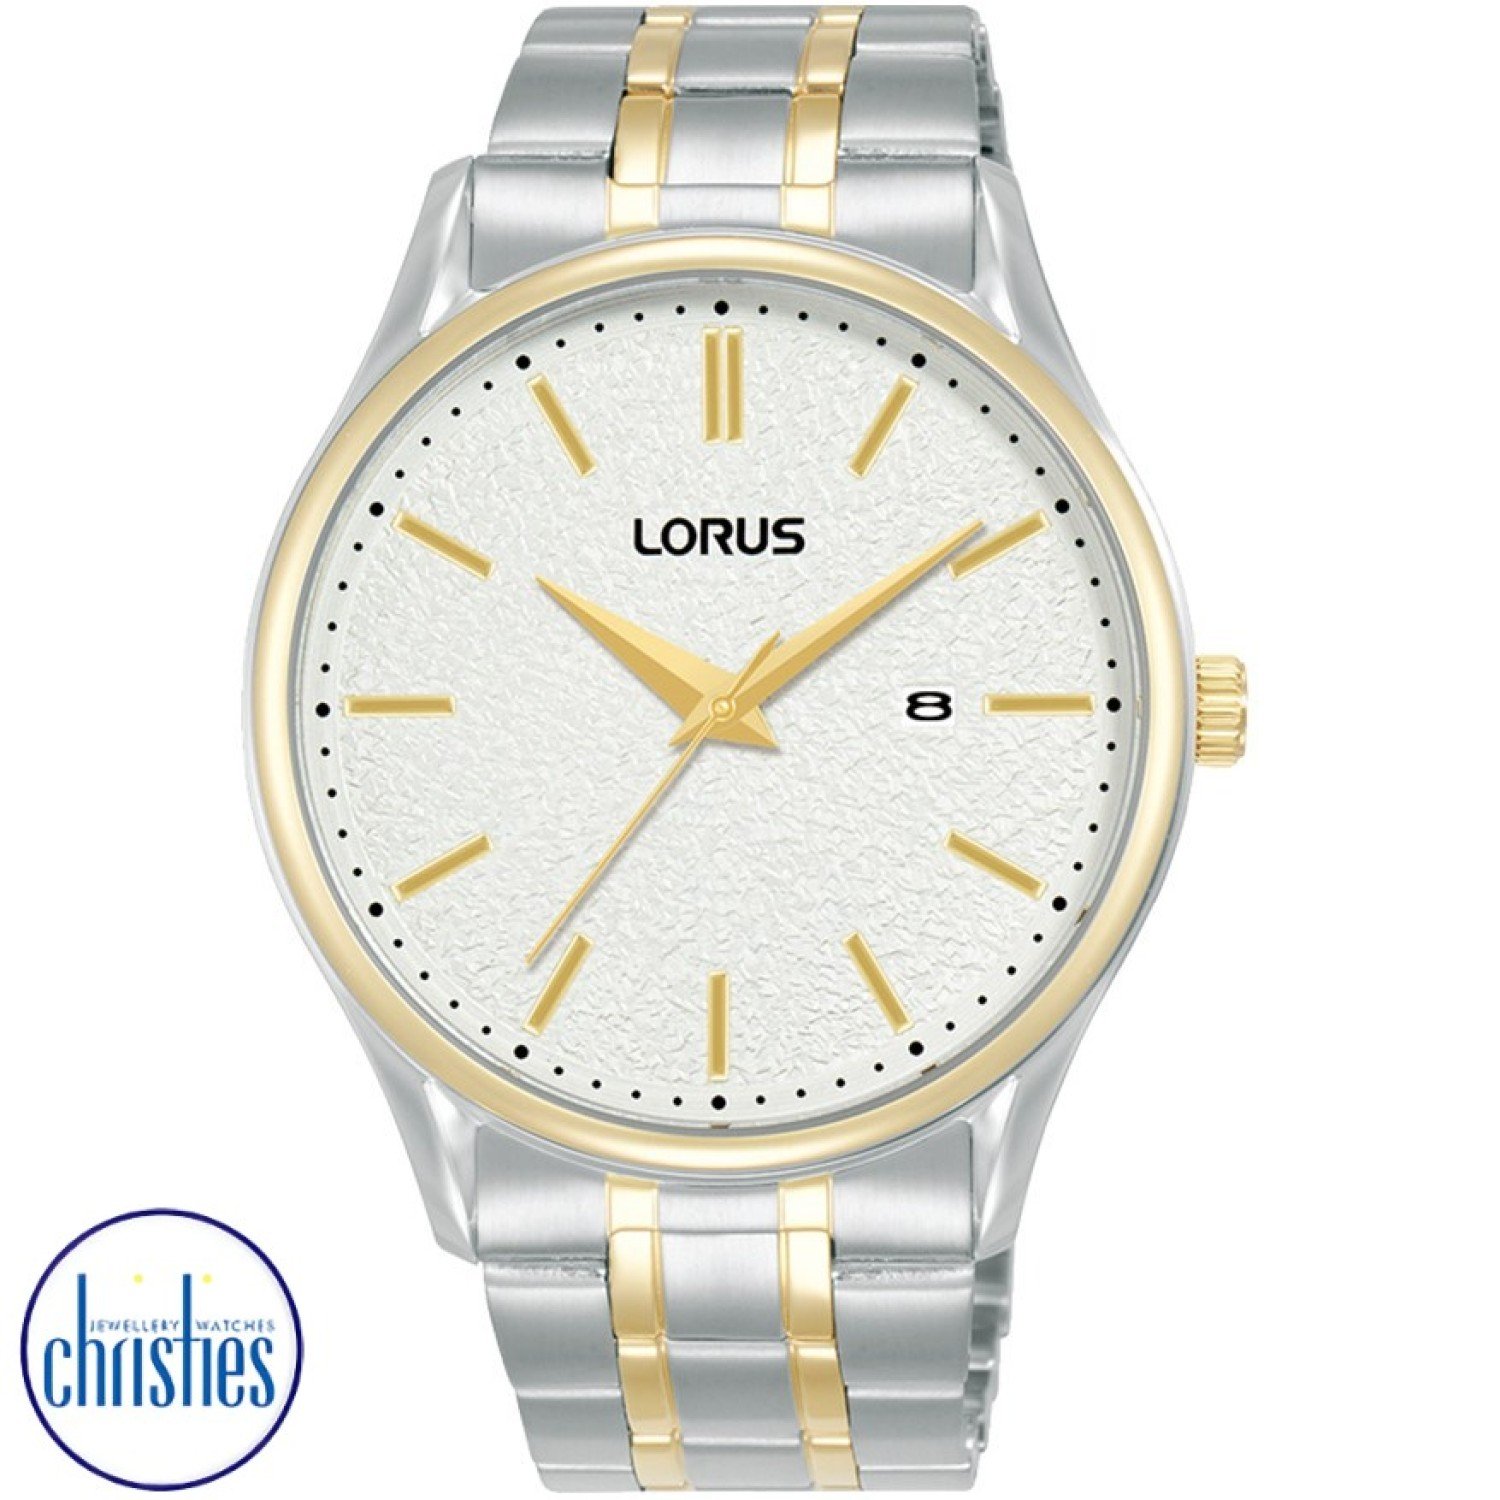 RH932QX9 Lorus Gents Classic Quartz RH932QX9 Lorus by Seiko Auckland s offers a diverse range of watch styles, including analog, digital, sports, and dress watches.